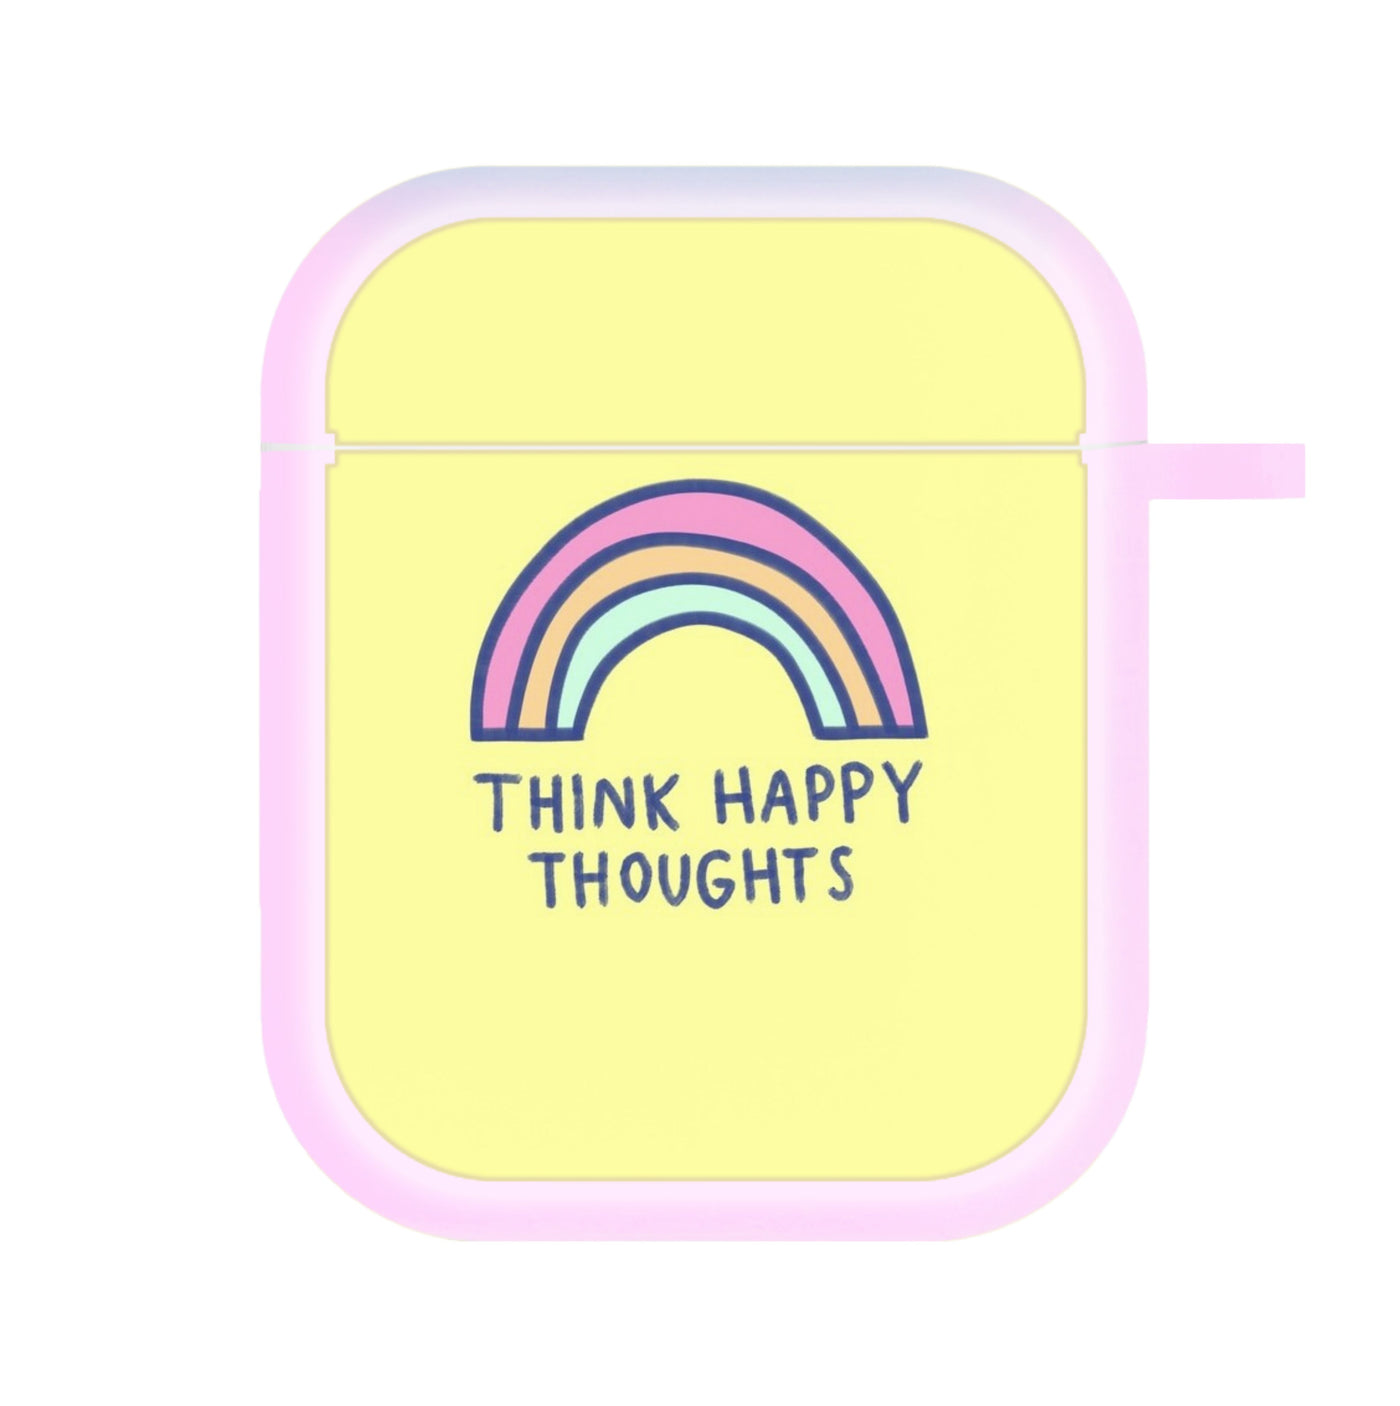 Think Happy Thoughts - Positivity AirPods Case